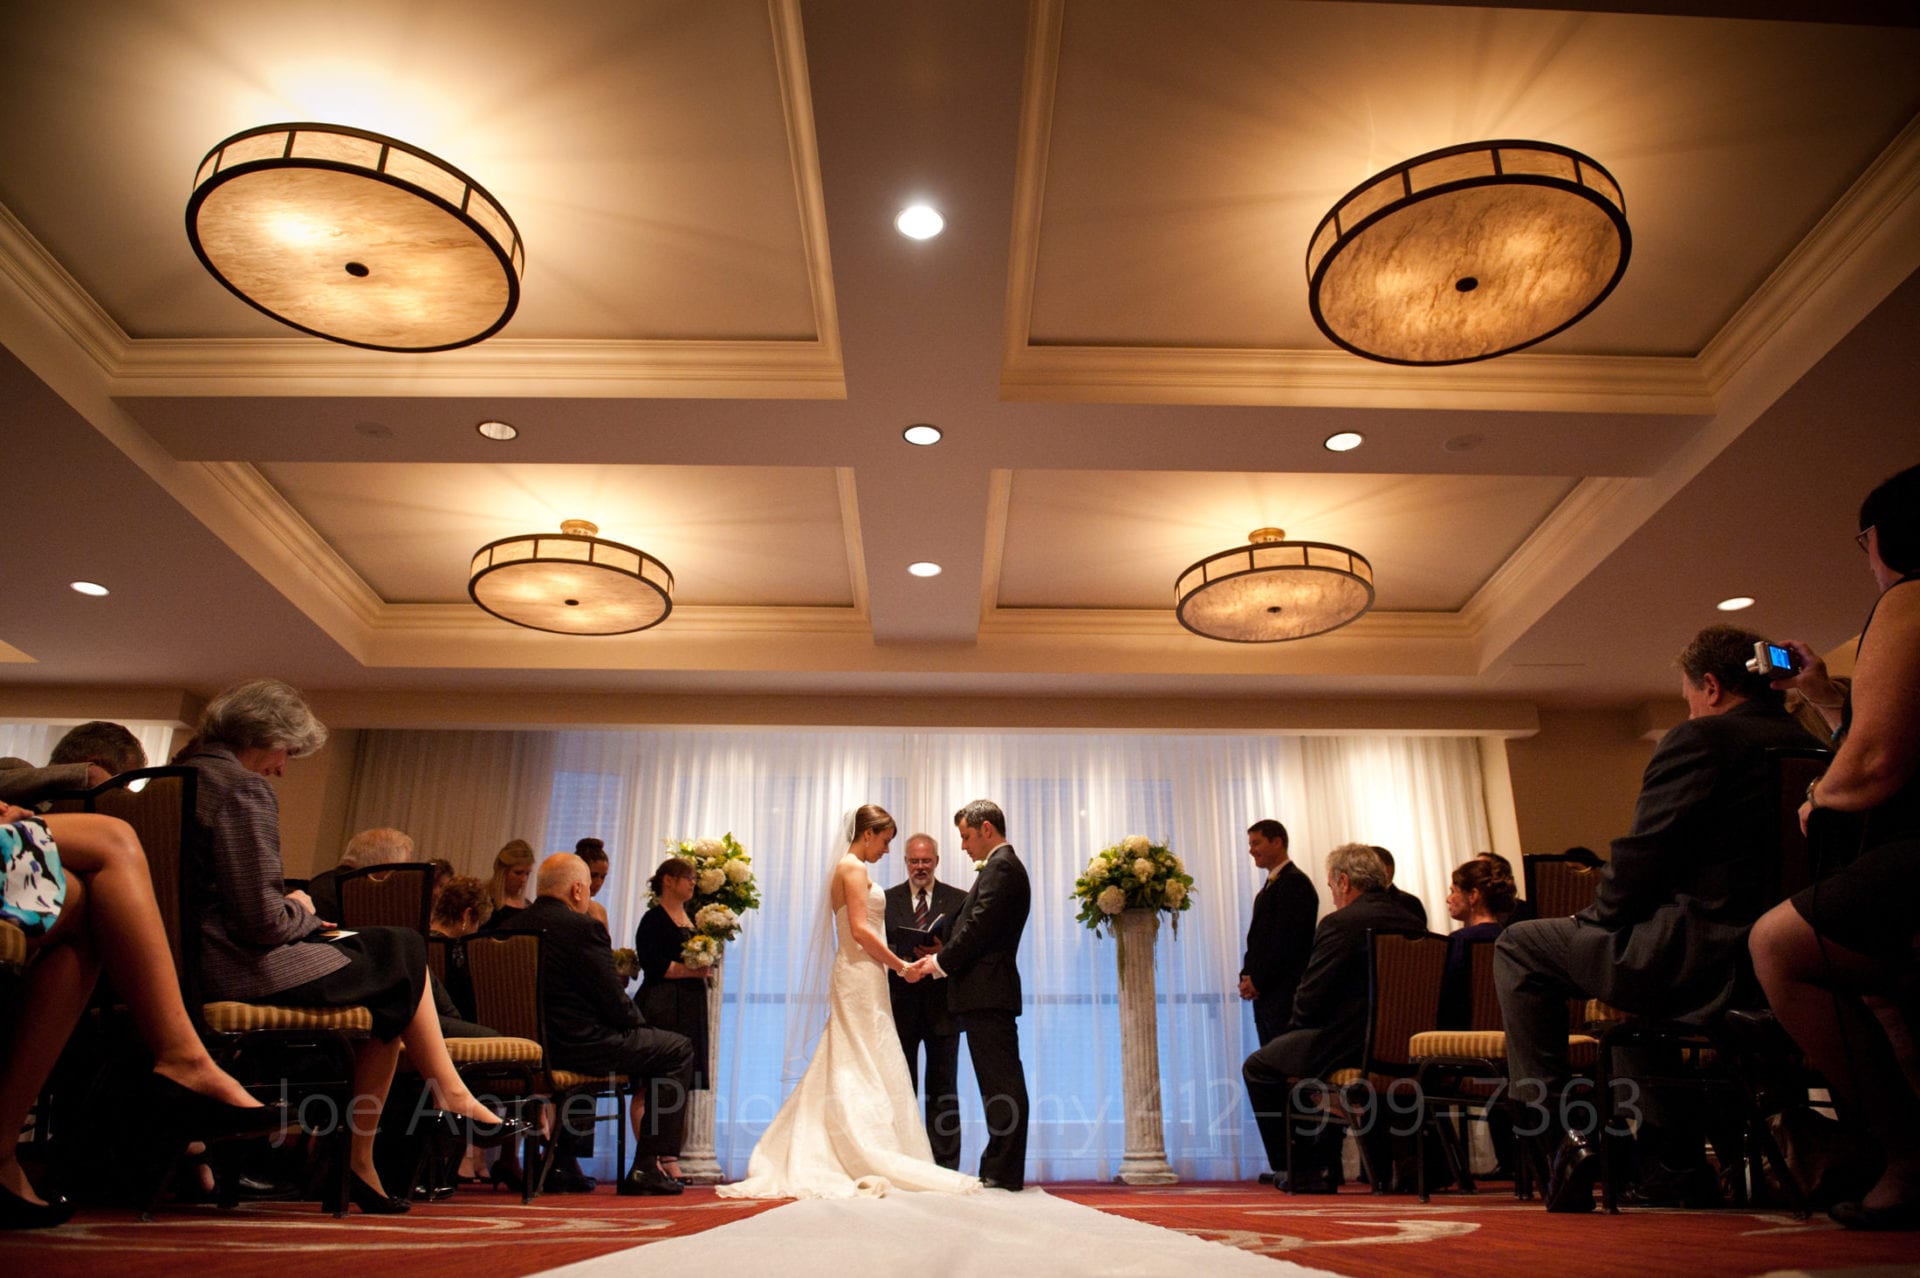 a bride and groom say their vows in a room with white ceilings and illuminated lights